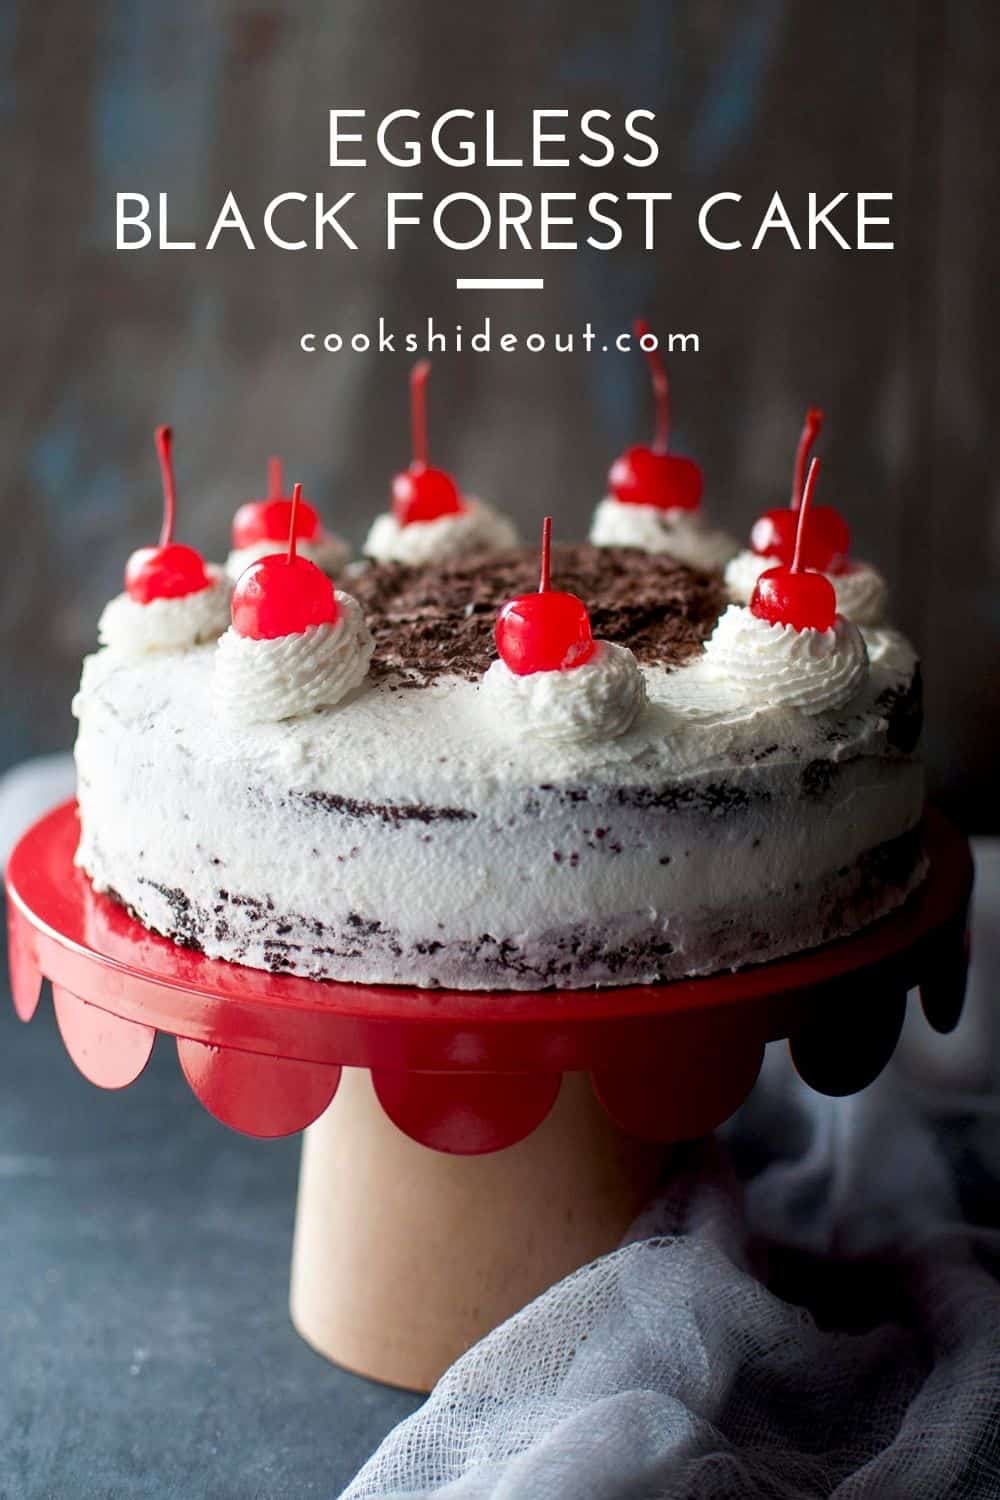 Red cake stand with black forest cake